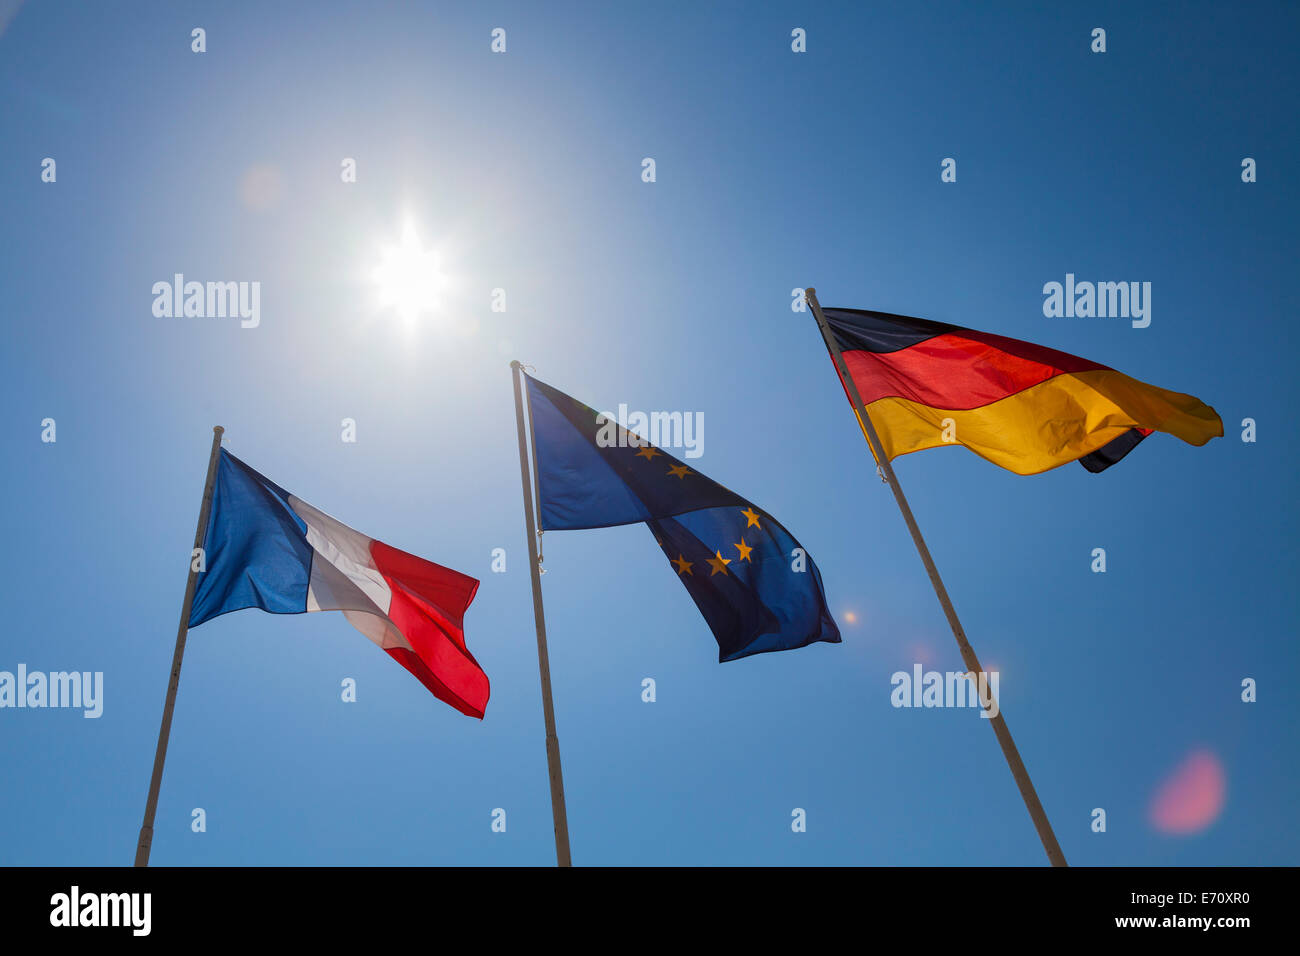 French, German and European flags against sun and blue sky. Stock Photo